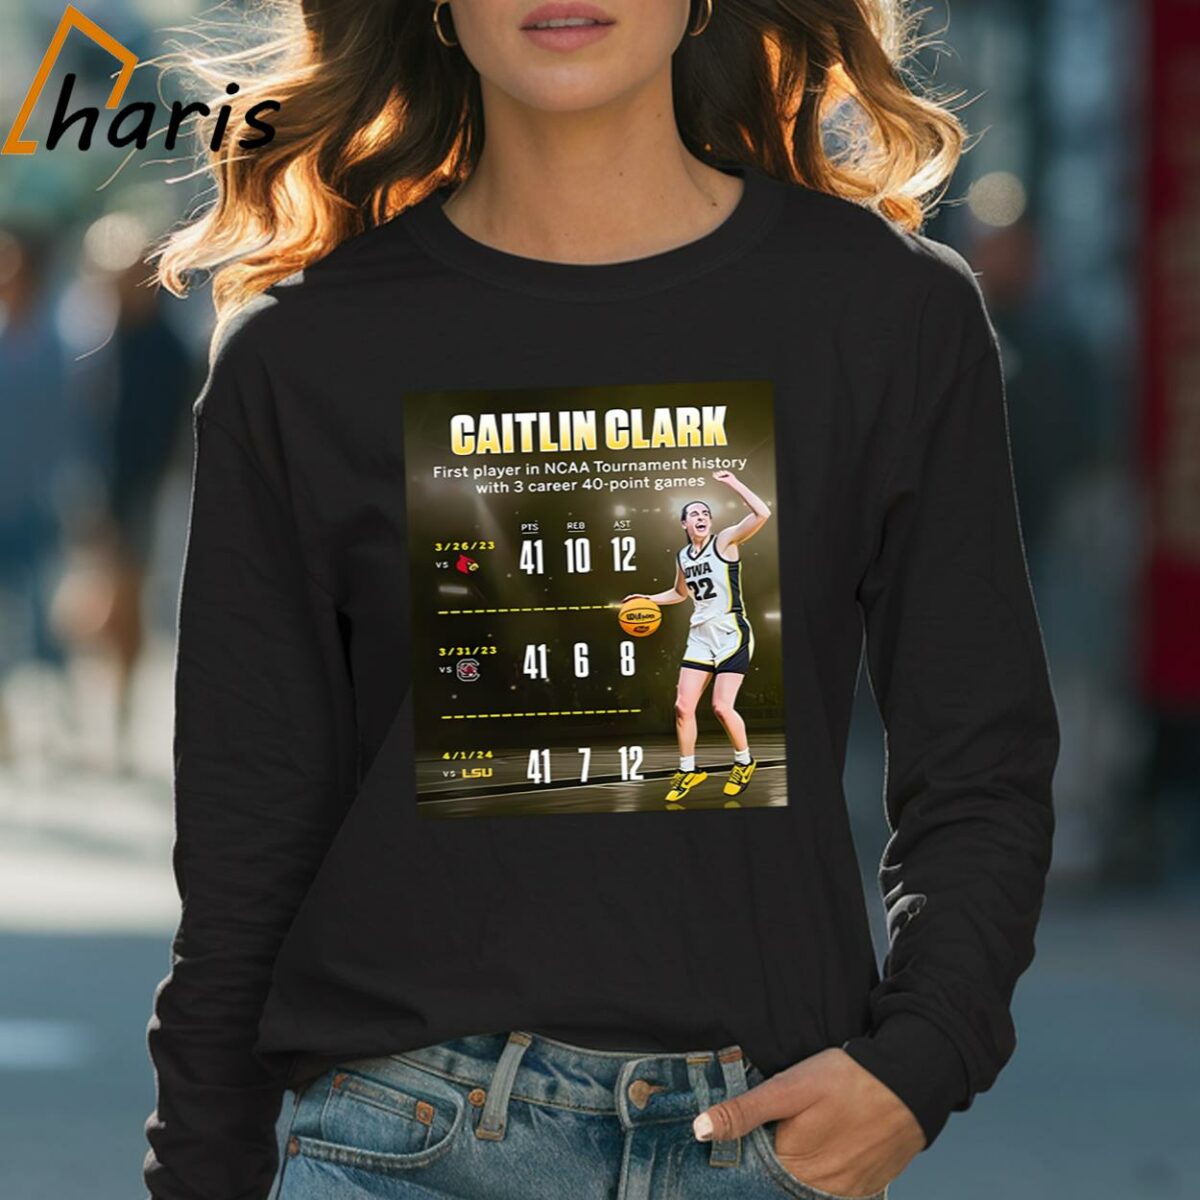 Caitlin Clark Become The First Player In NCAA Tournament History T Shirt 4 Long sleeve shirt